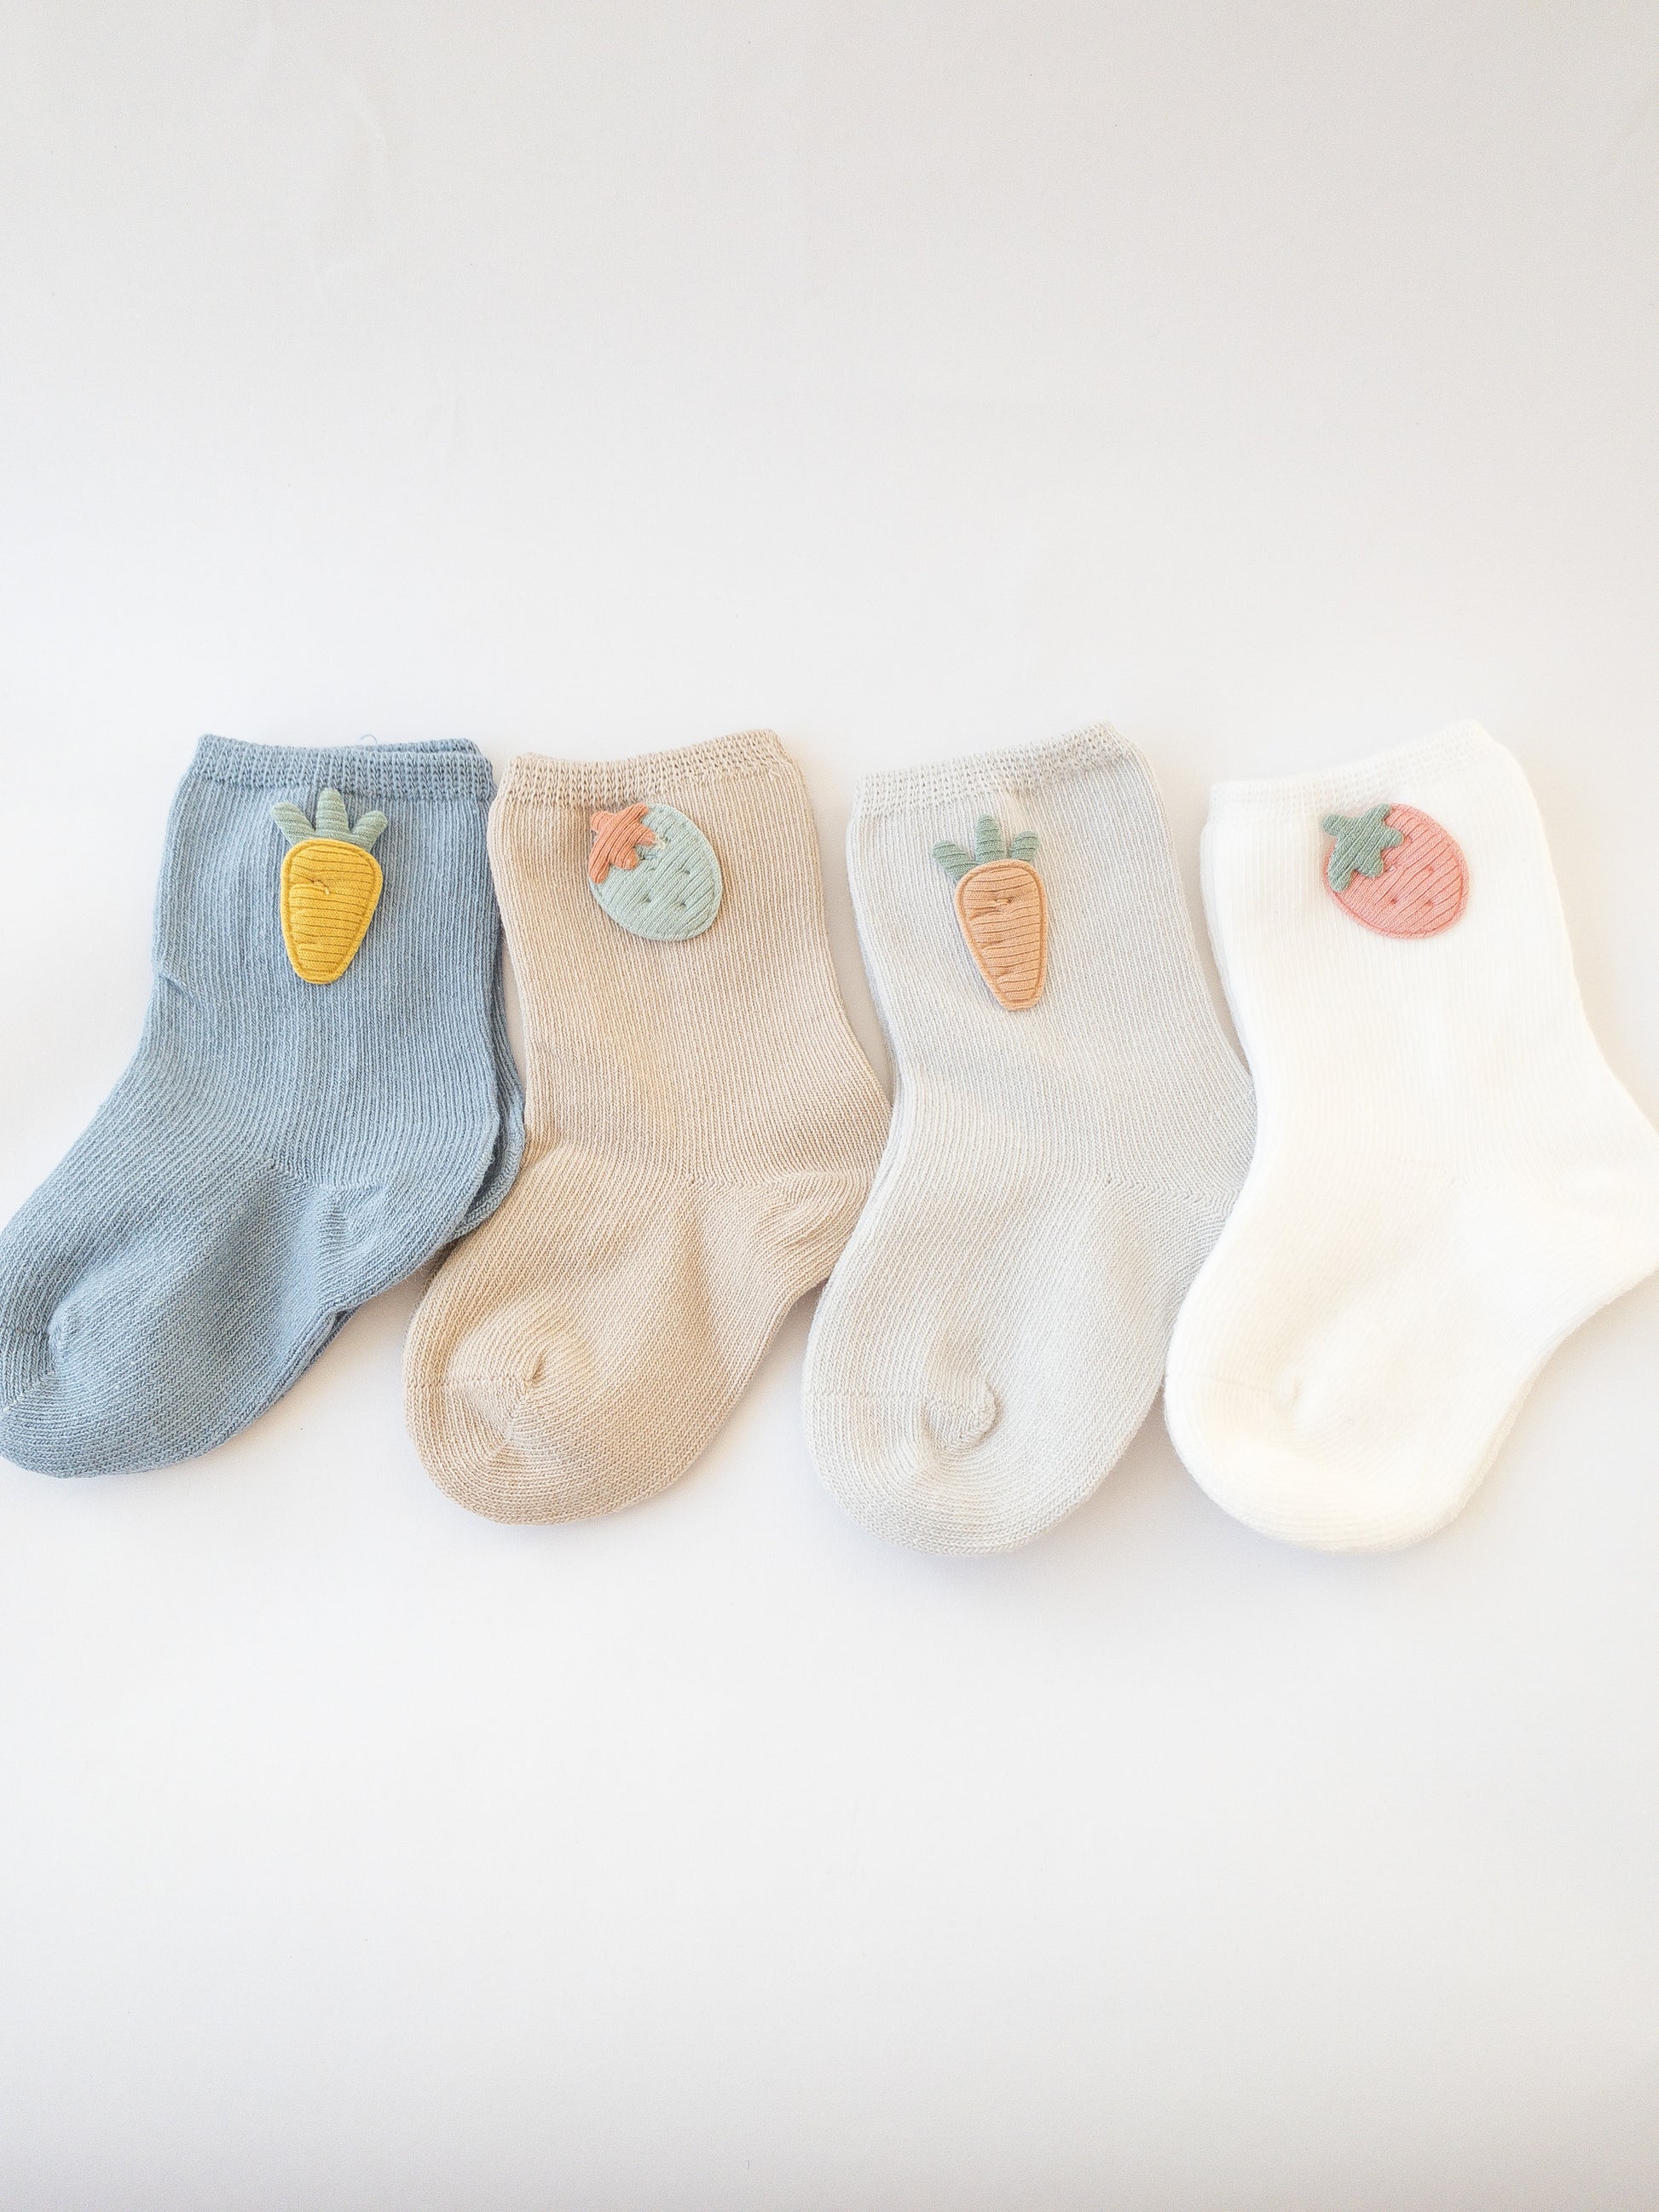 Our love for fruit continues with these socks adorned with cute fabric strawberries and carrots. Each set comes with 4 pairs of socks. Choose from two colorways: pink/yellow/grey/white or blue/grey/taupe/white.